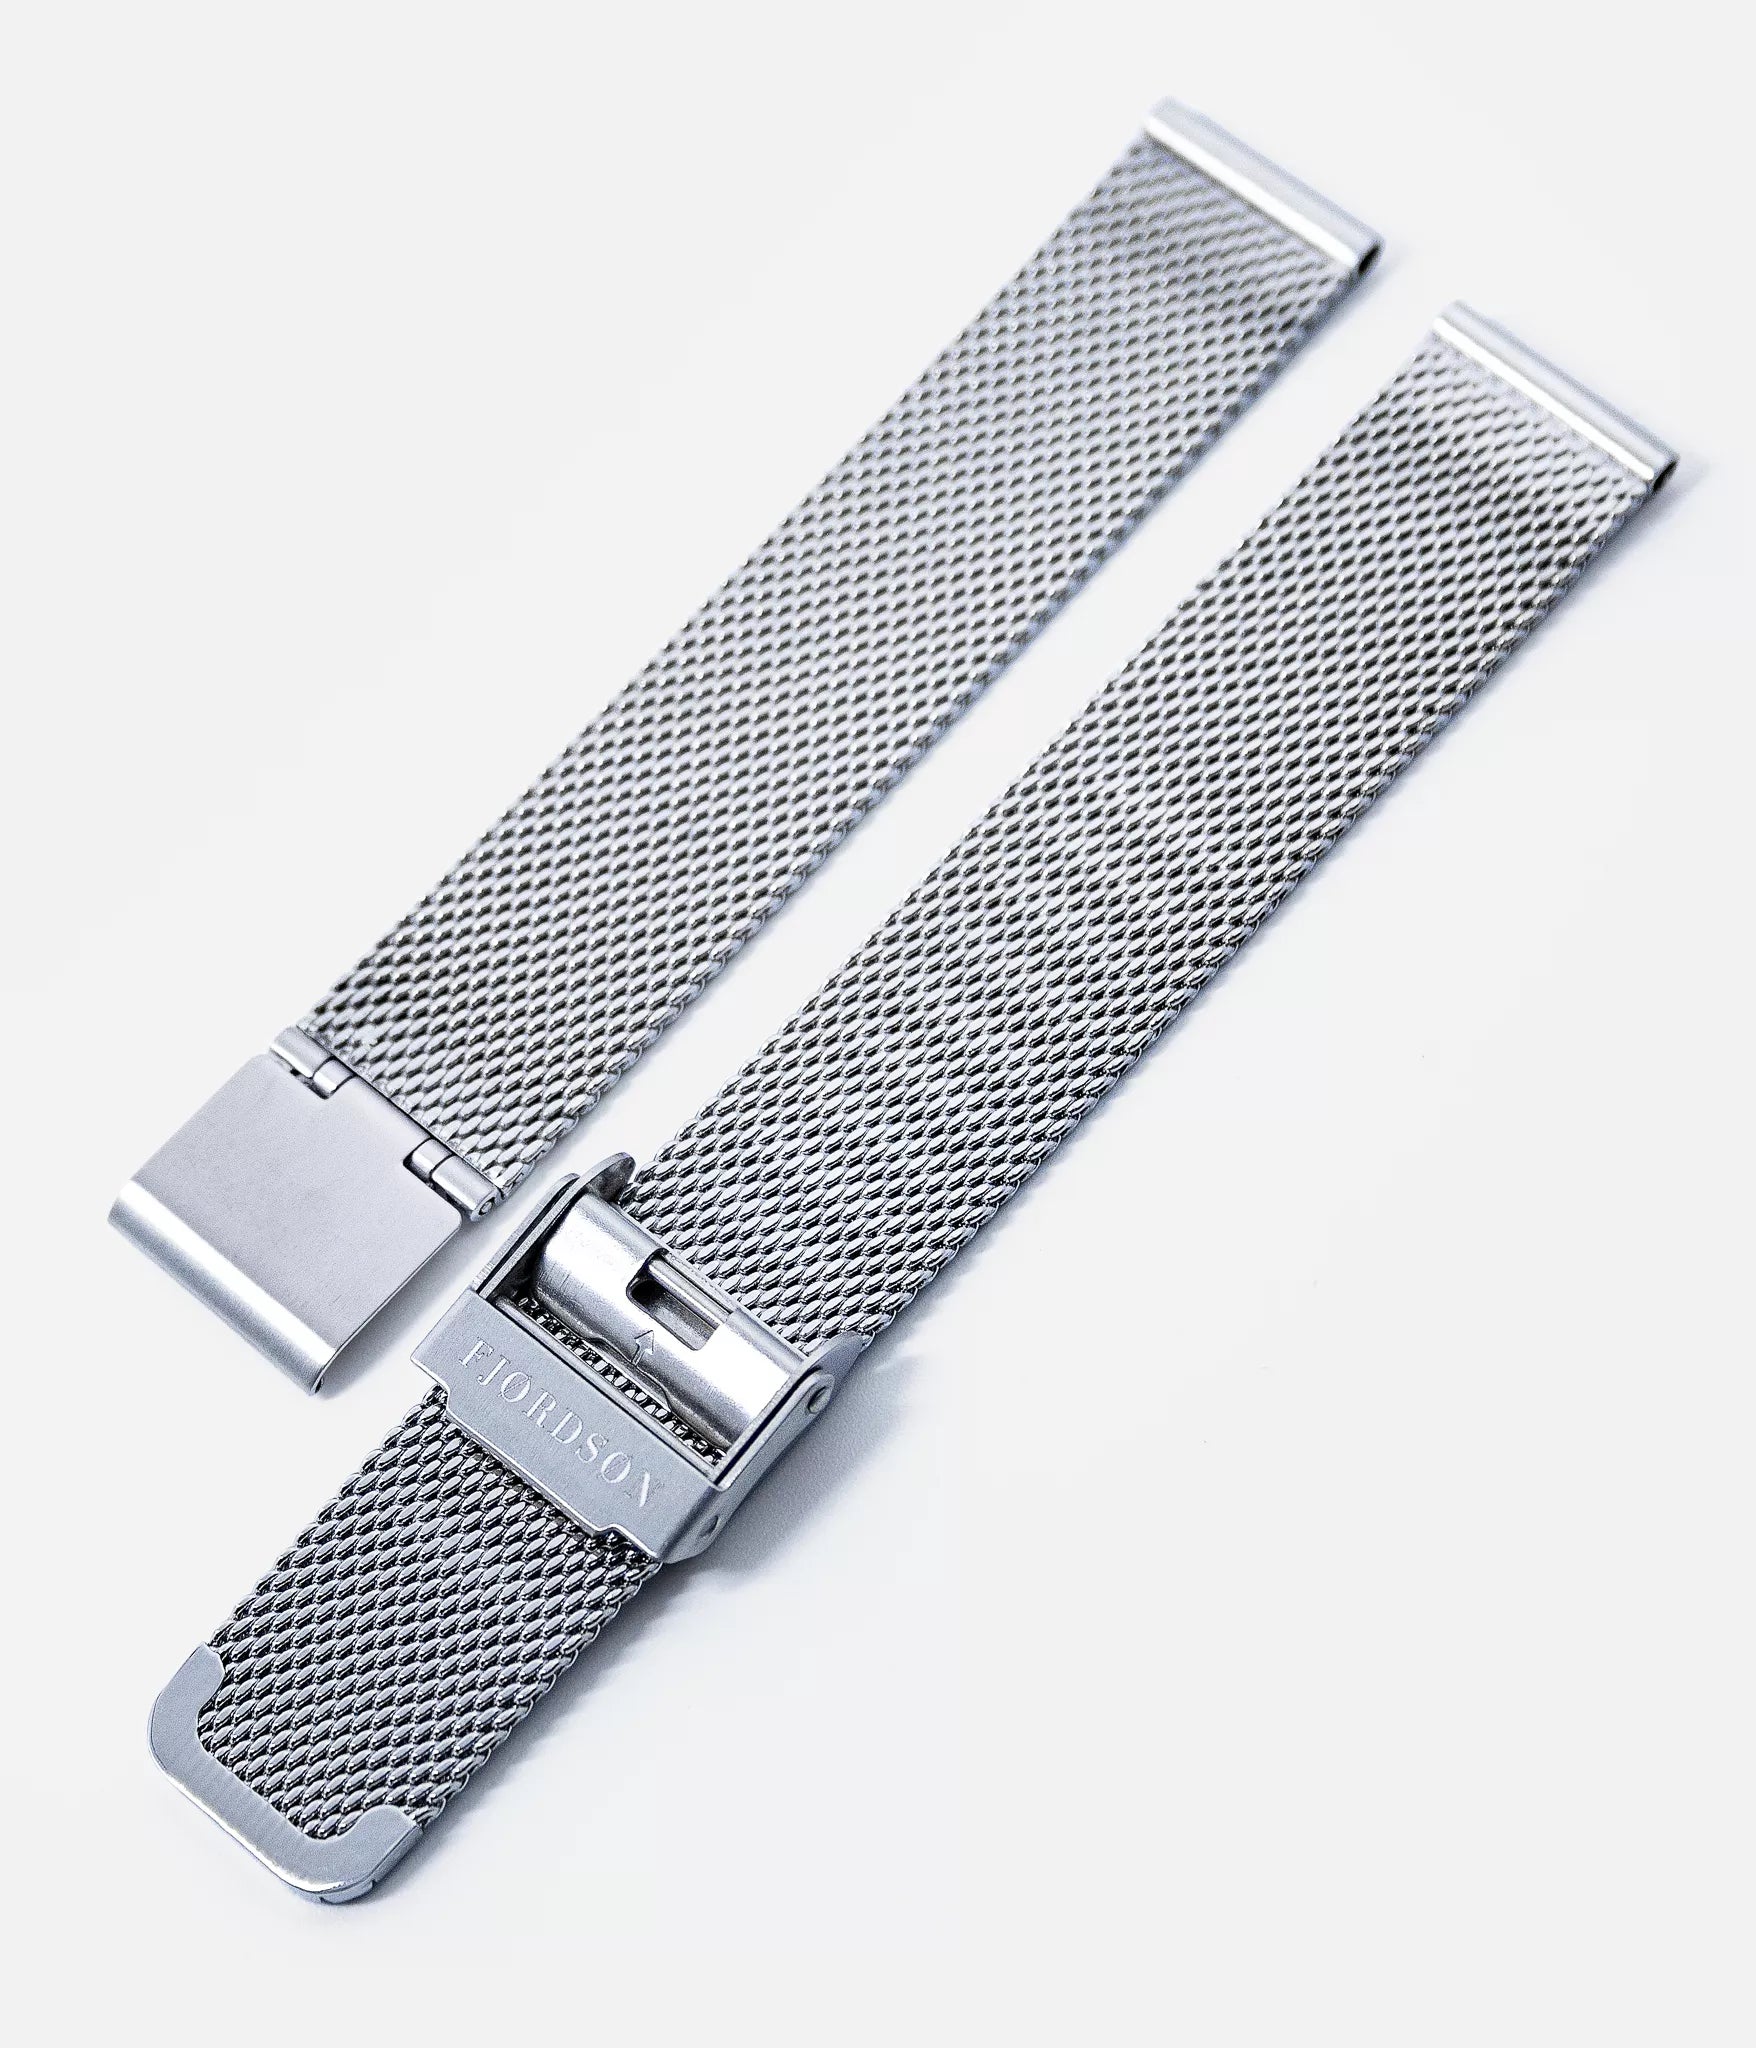 Watch strap shot - Fjordson matching watches with white dial and silver metal watch strap - Couple Watches Gift set - vegan & approved by PETA - Swiss made